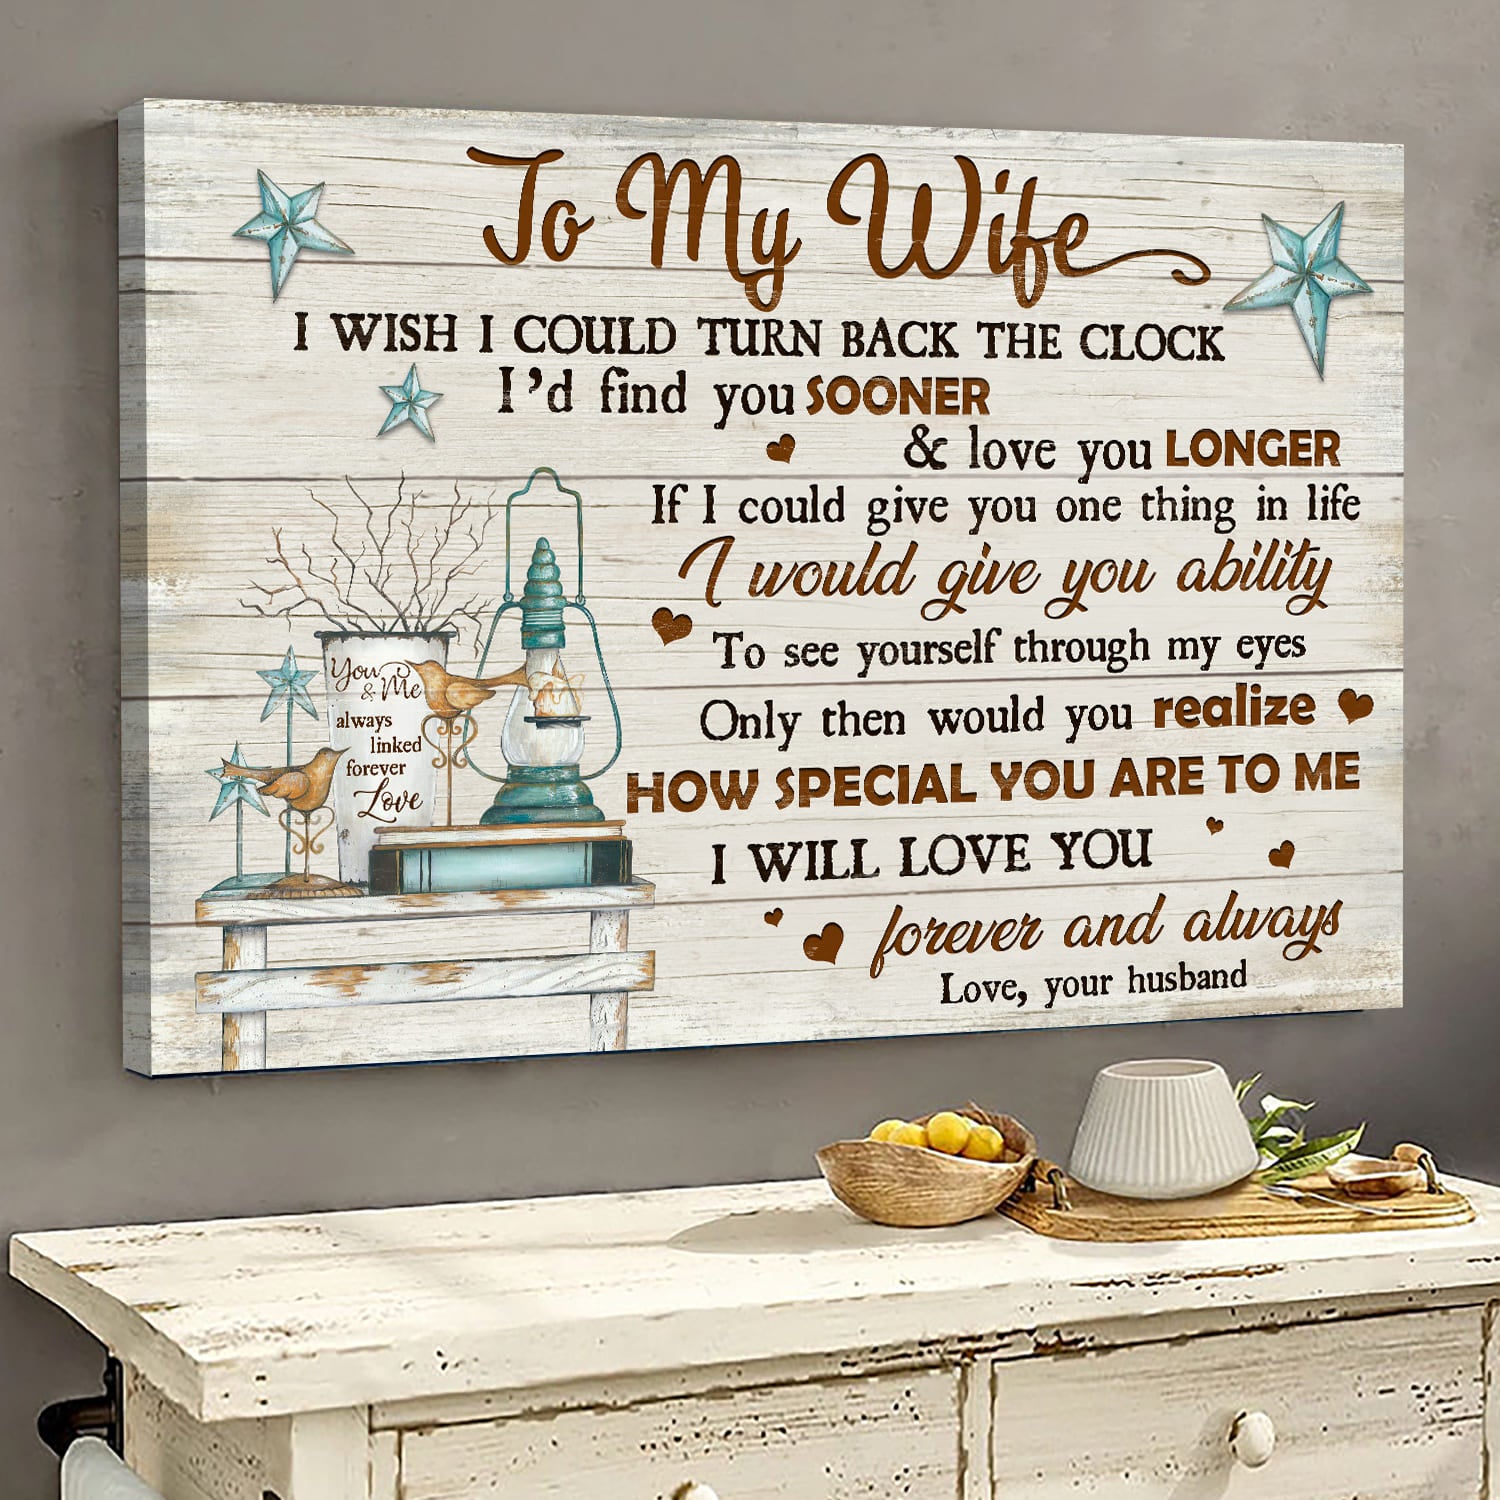 To my wife, Vintage lantern, Blue stars, How special you are to me - Couple Landscape Canvas Prints, Wall Art